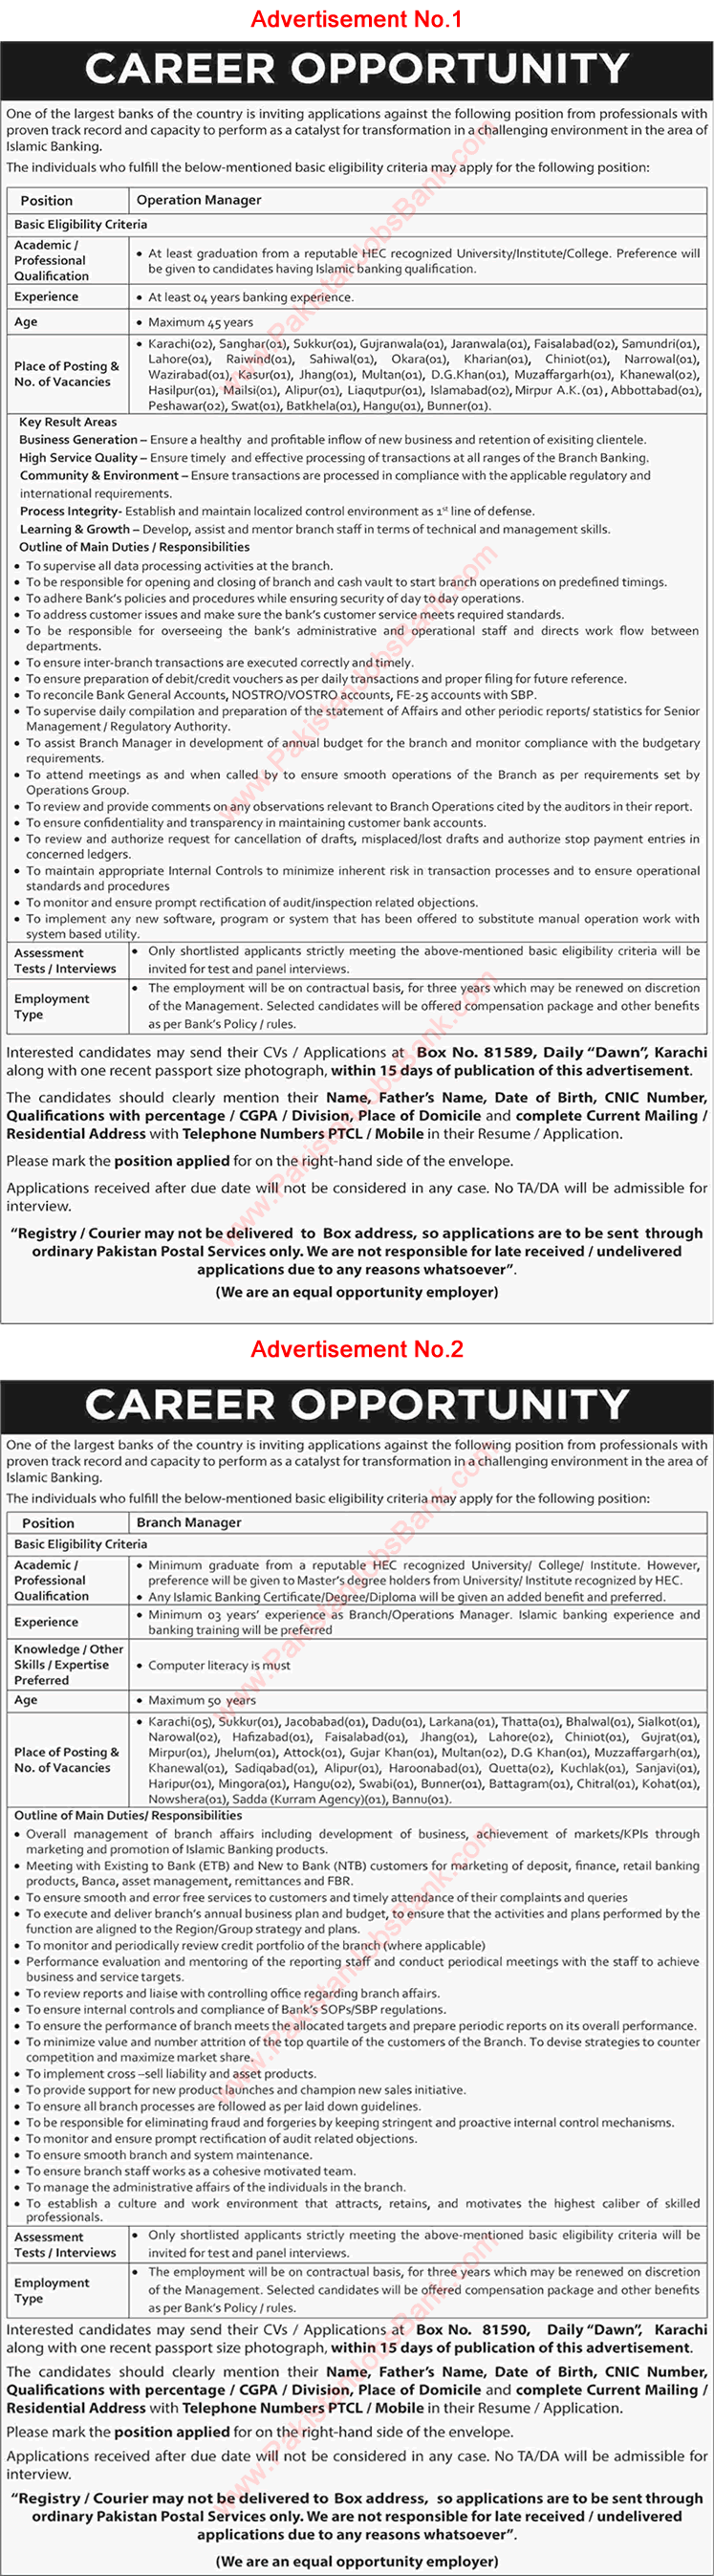 Banking Jobs in Pakistan May 2019 Branch Managers & Operation Managers Latest